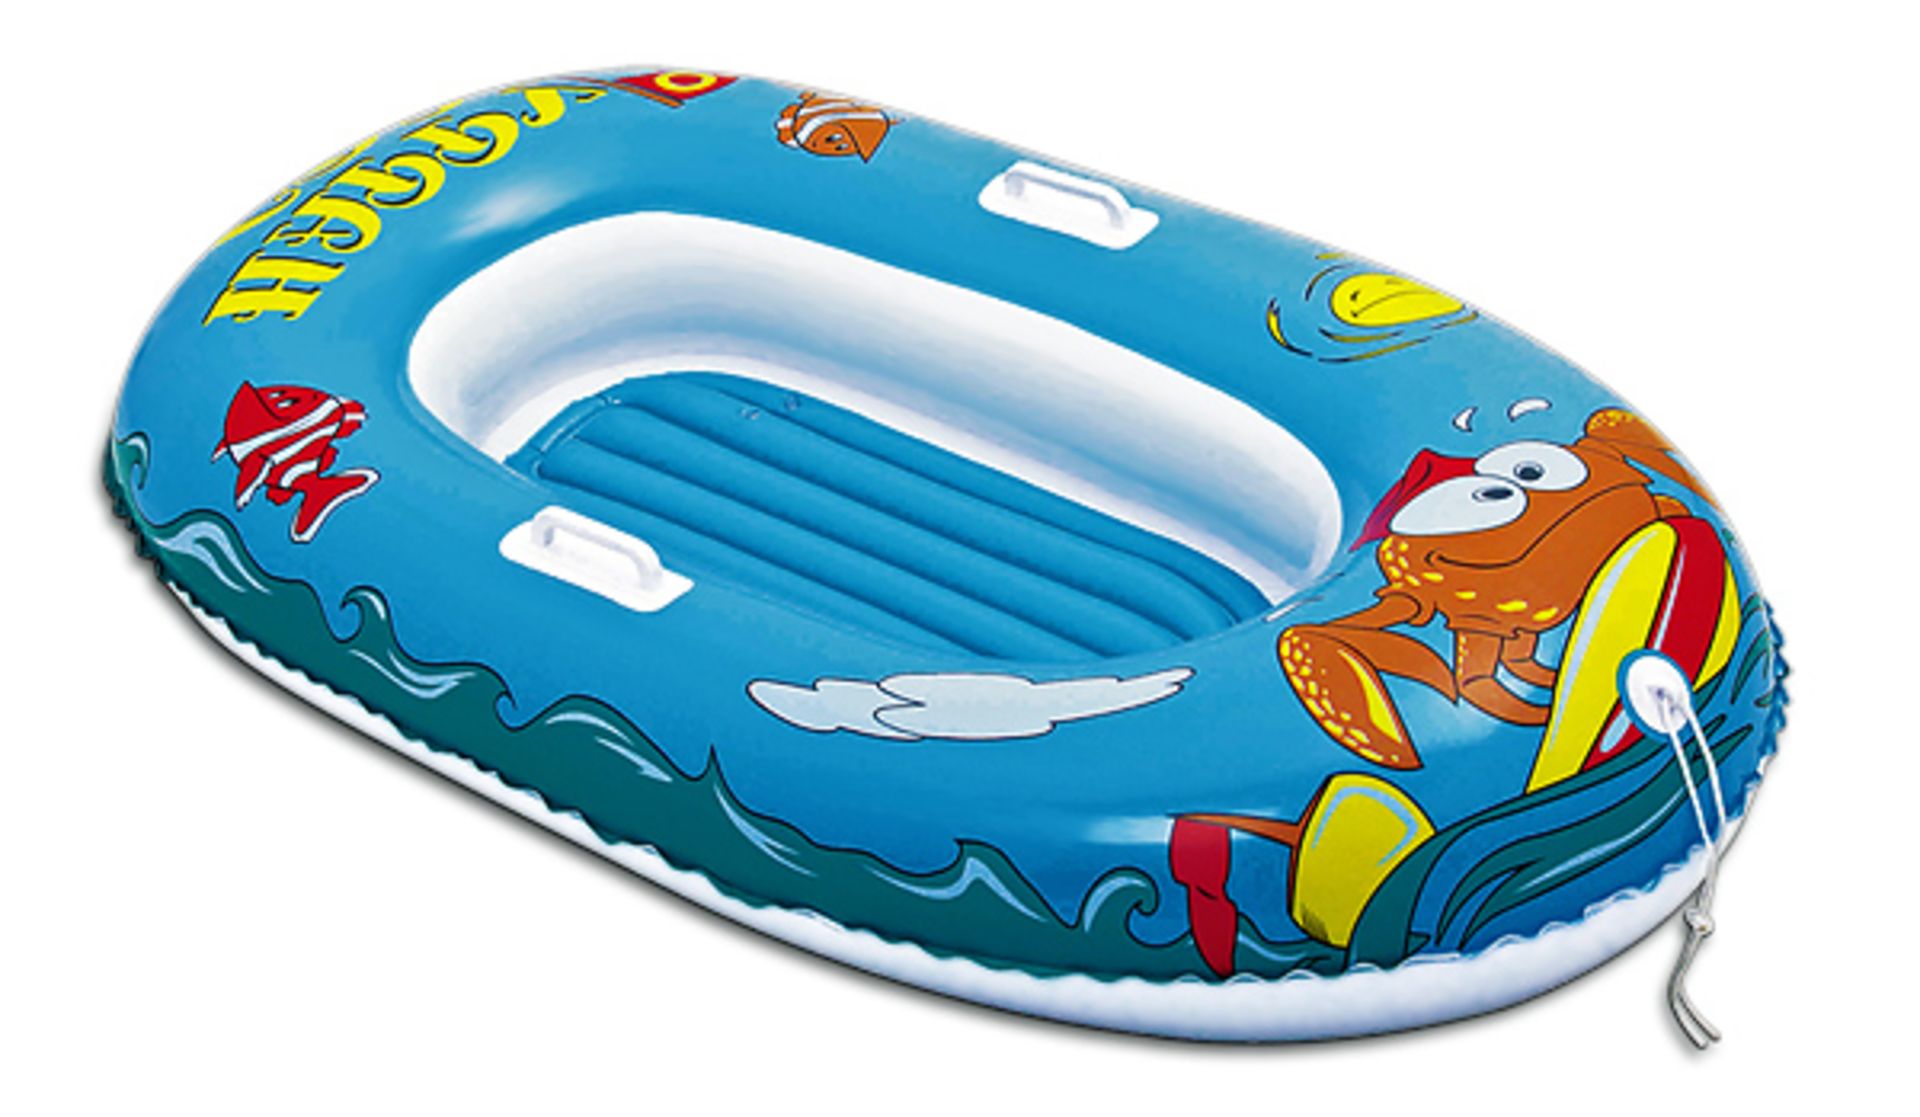 V *TRADE QTY* Brand New Boxed Junior Dinghy Suitable For Up To 10 Year Old Child X 5 YOUR BID